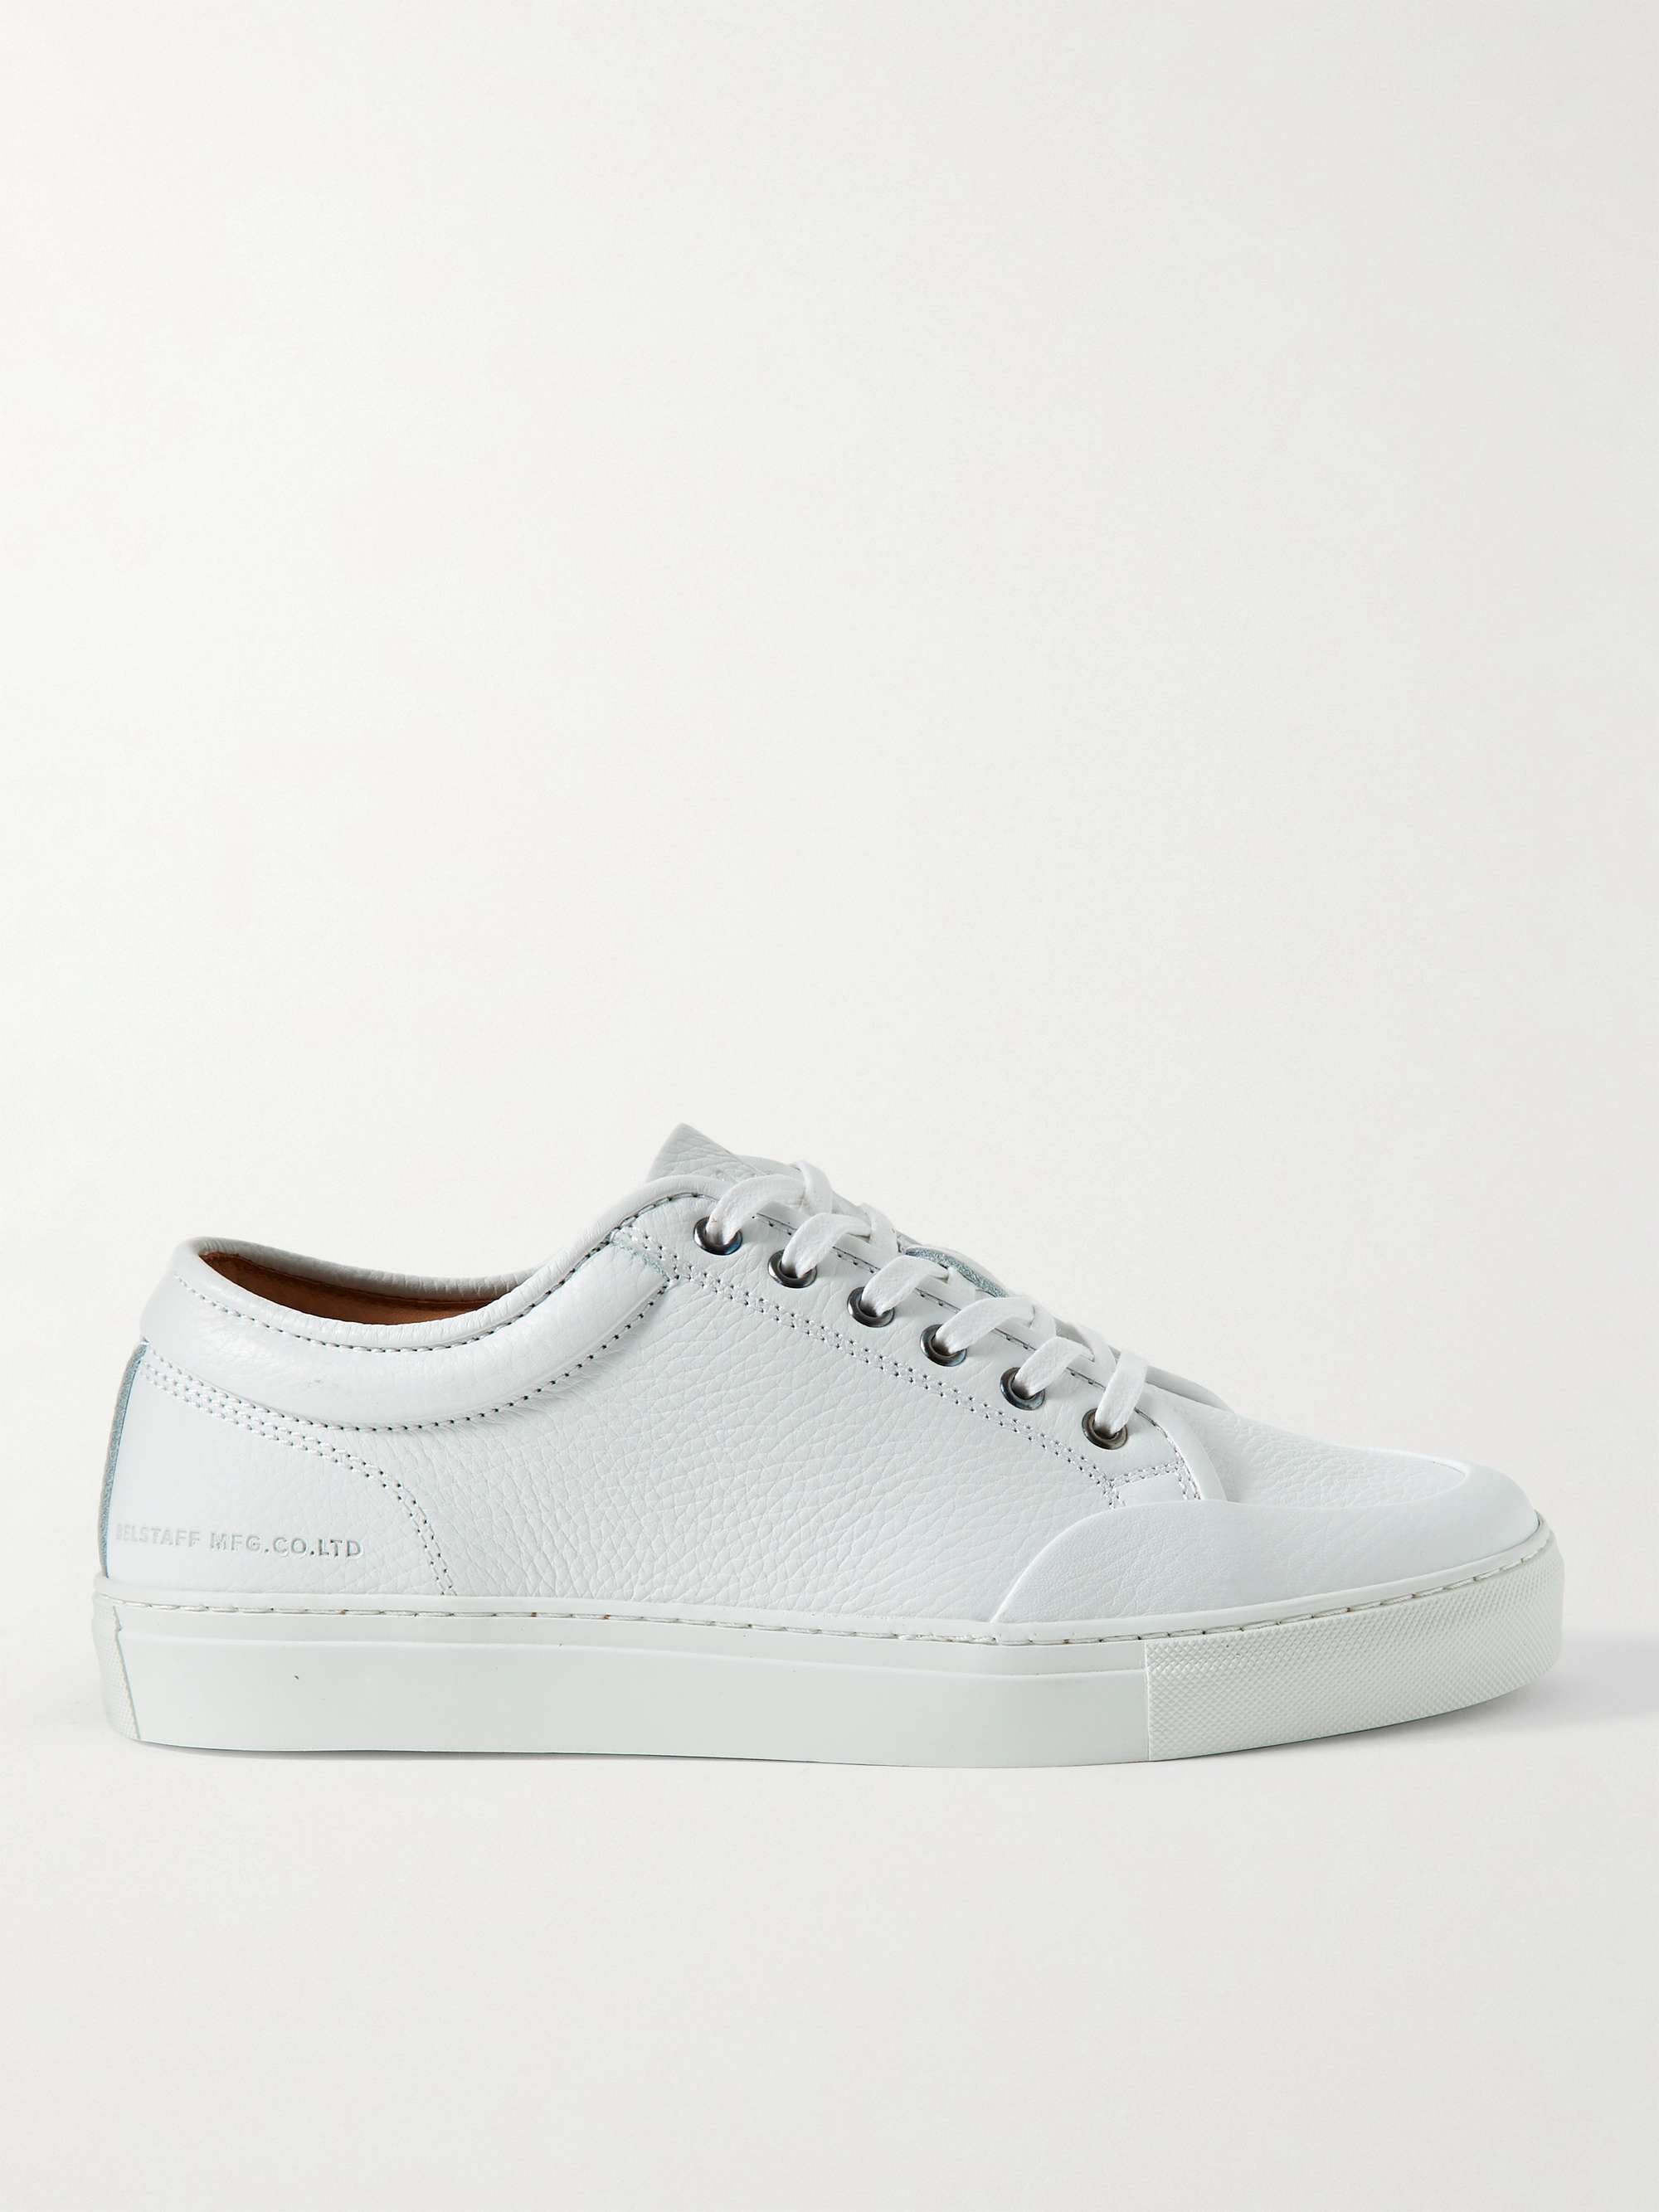 BELSTAFF Rally Suede-Trimmed Leather Sneakers